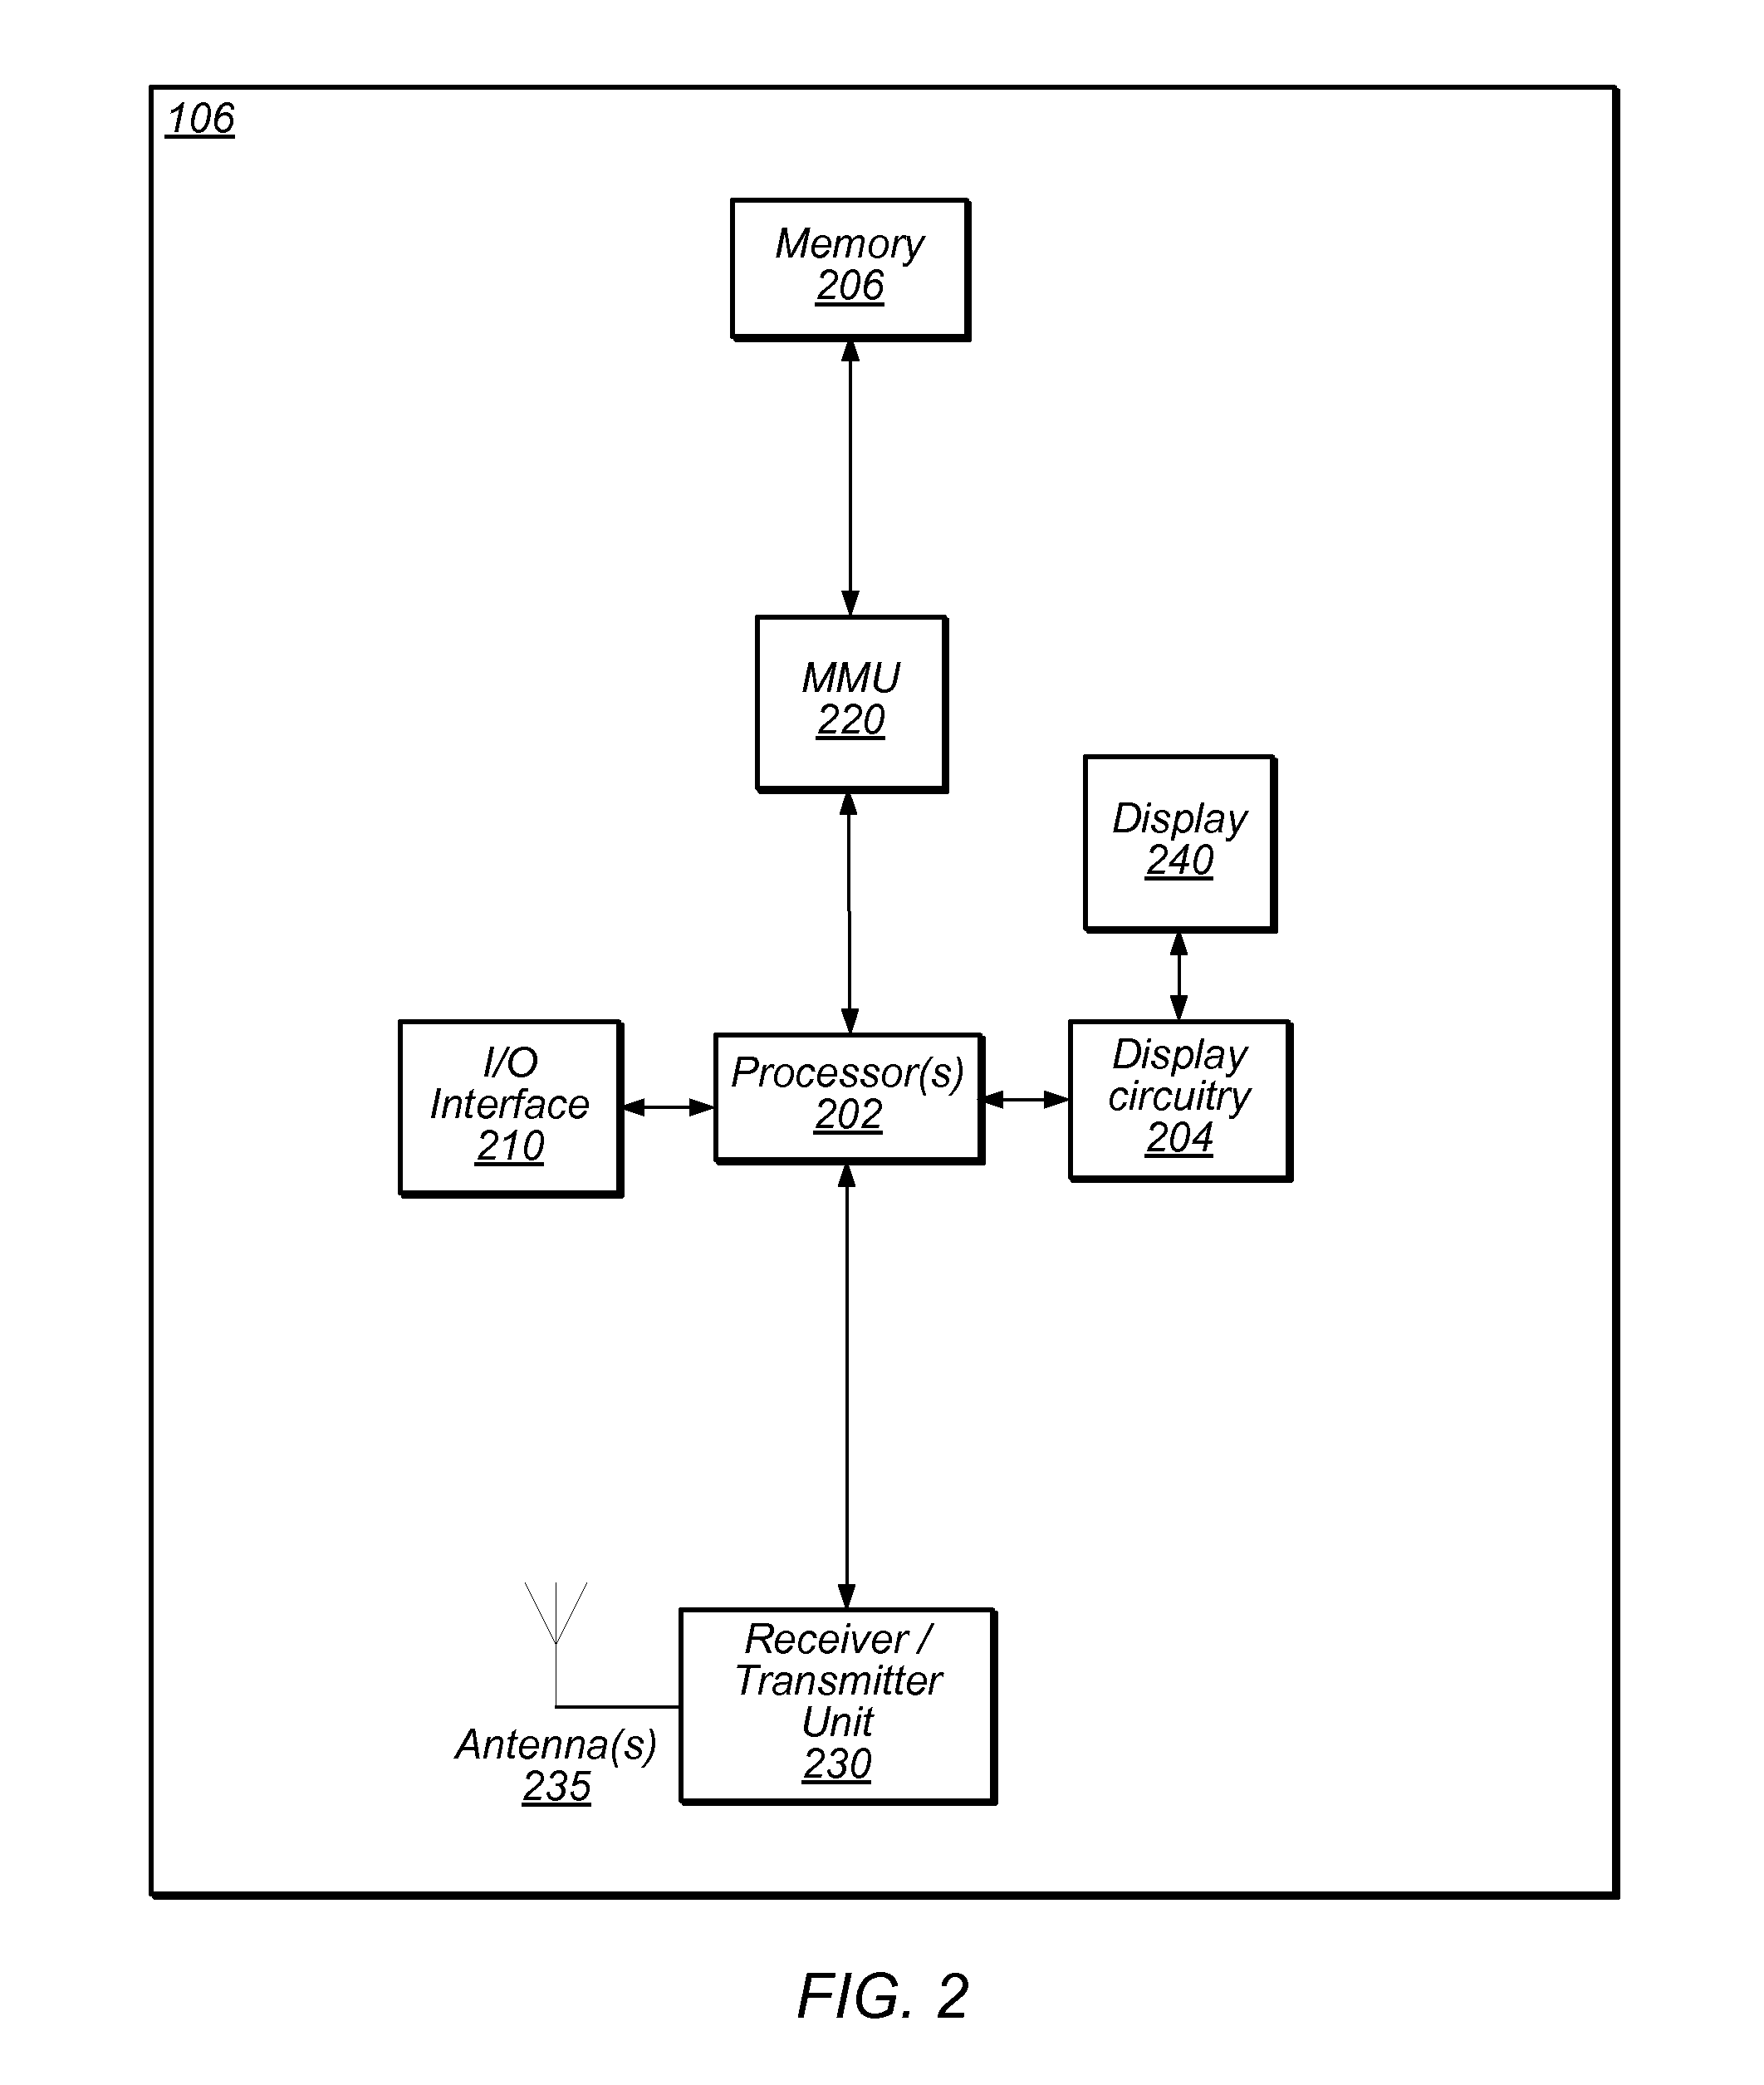 Method for implementing specific termination cause codes in termination requests